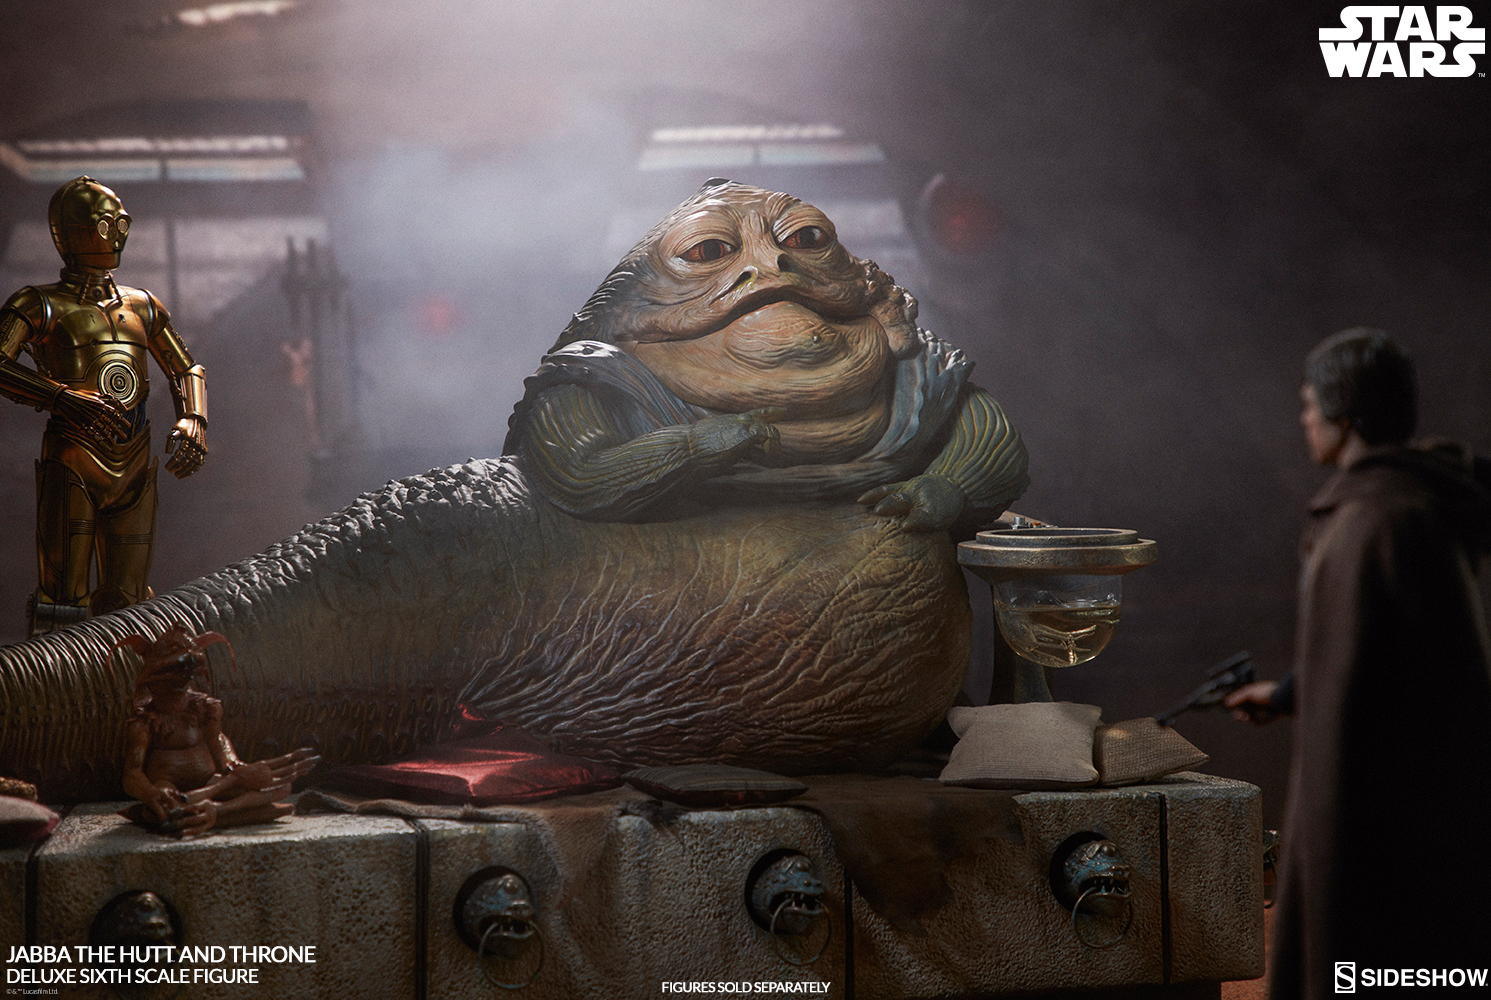 Star Wars Episode VI : Jabba the Hutt and throne - Deluxe Figure (Sideshow) Uzd1jXWD_o